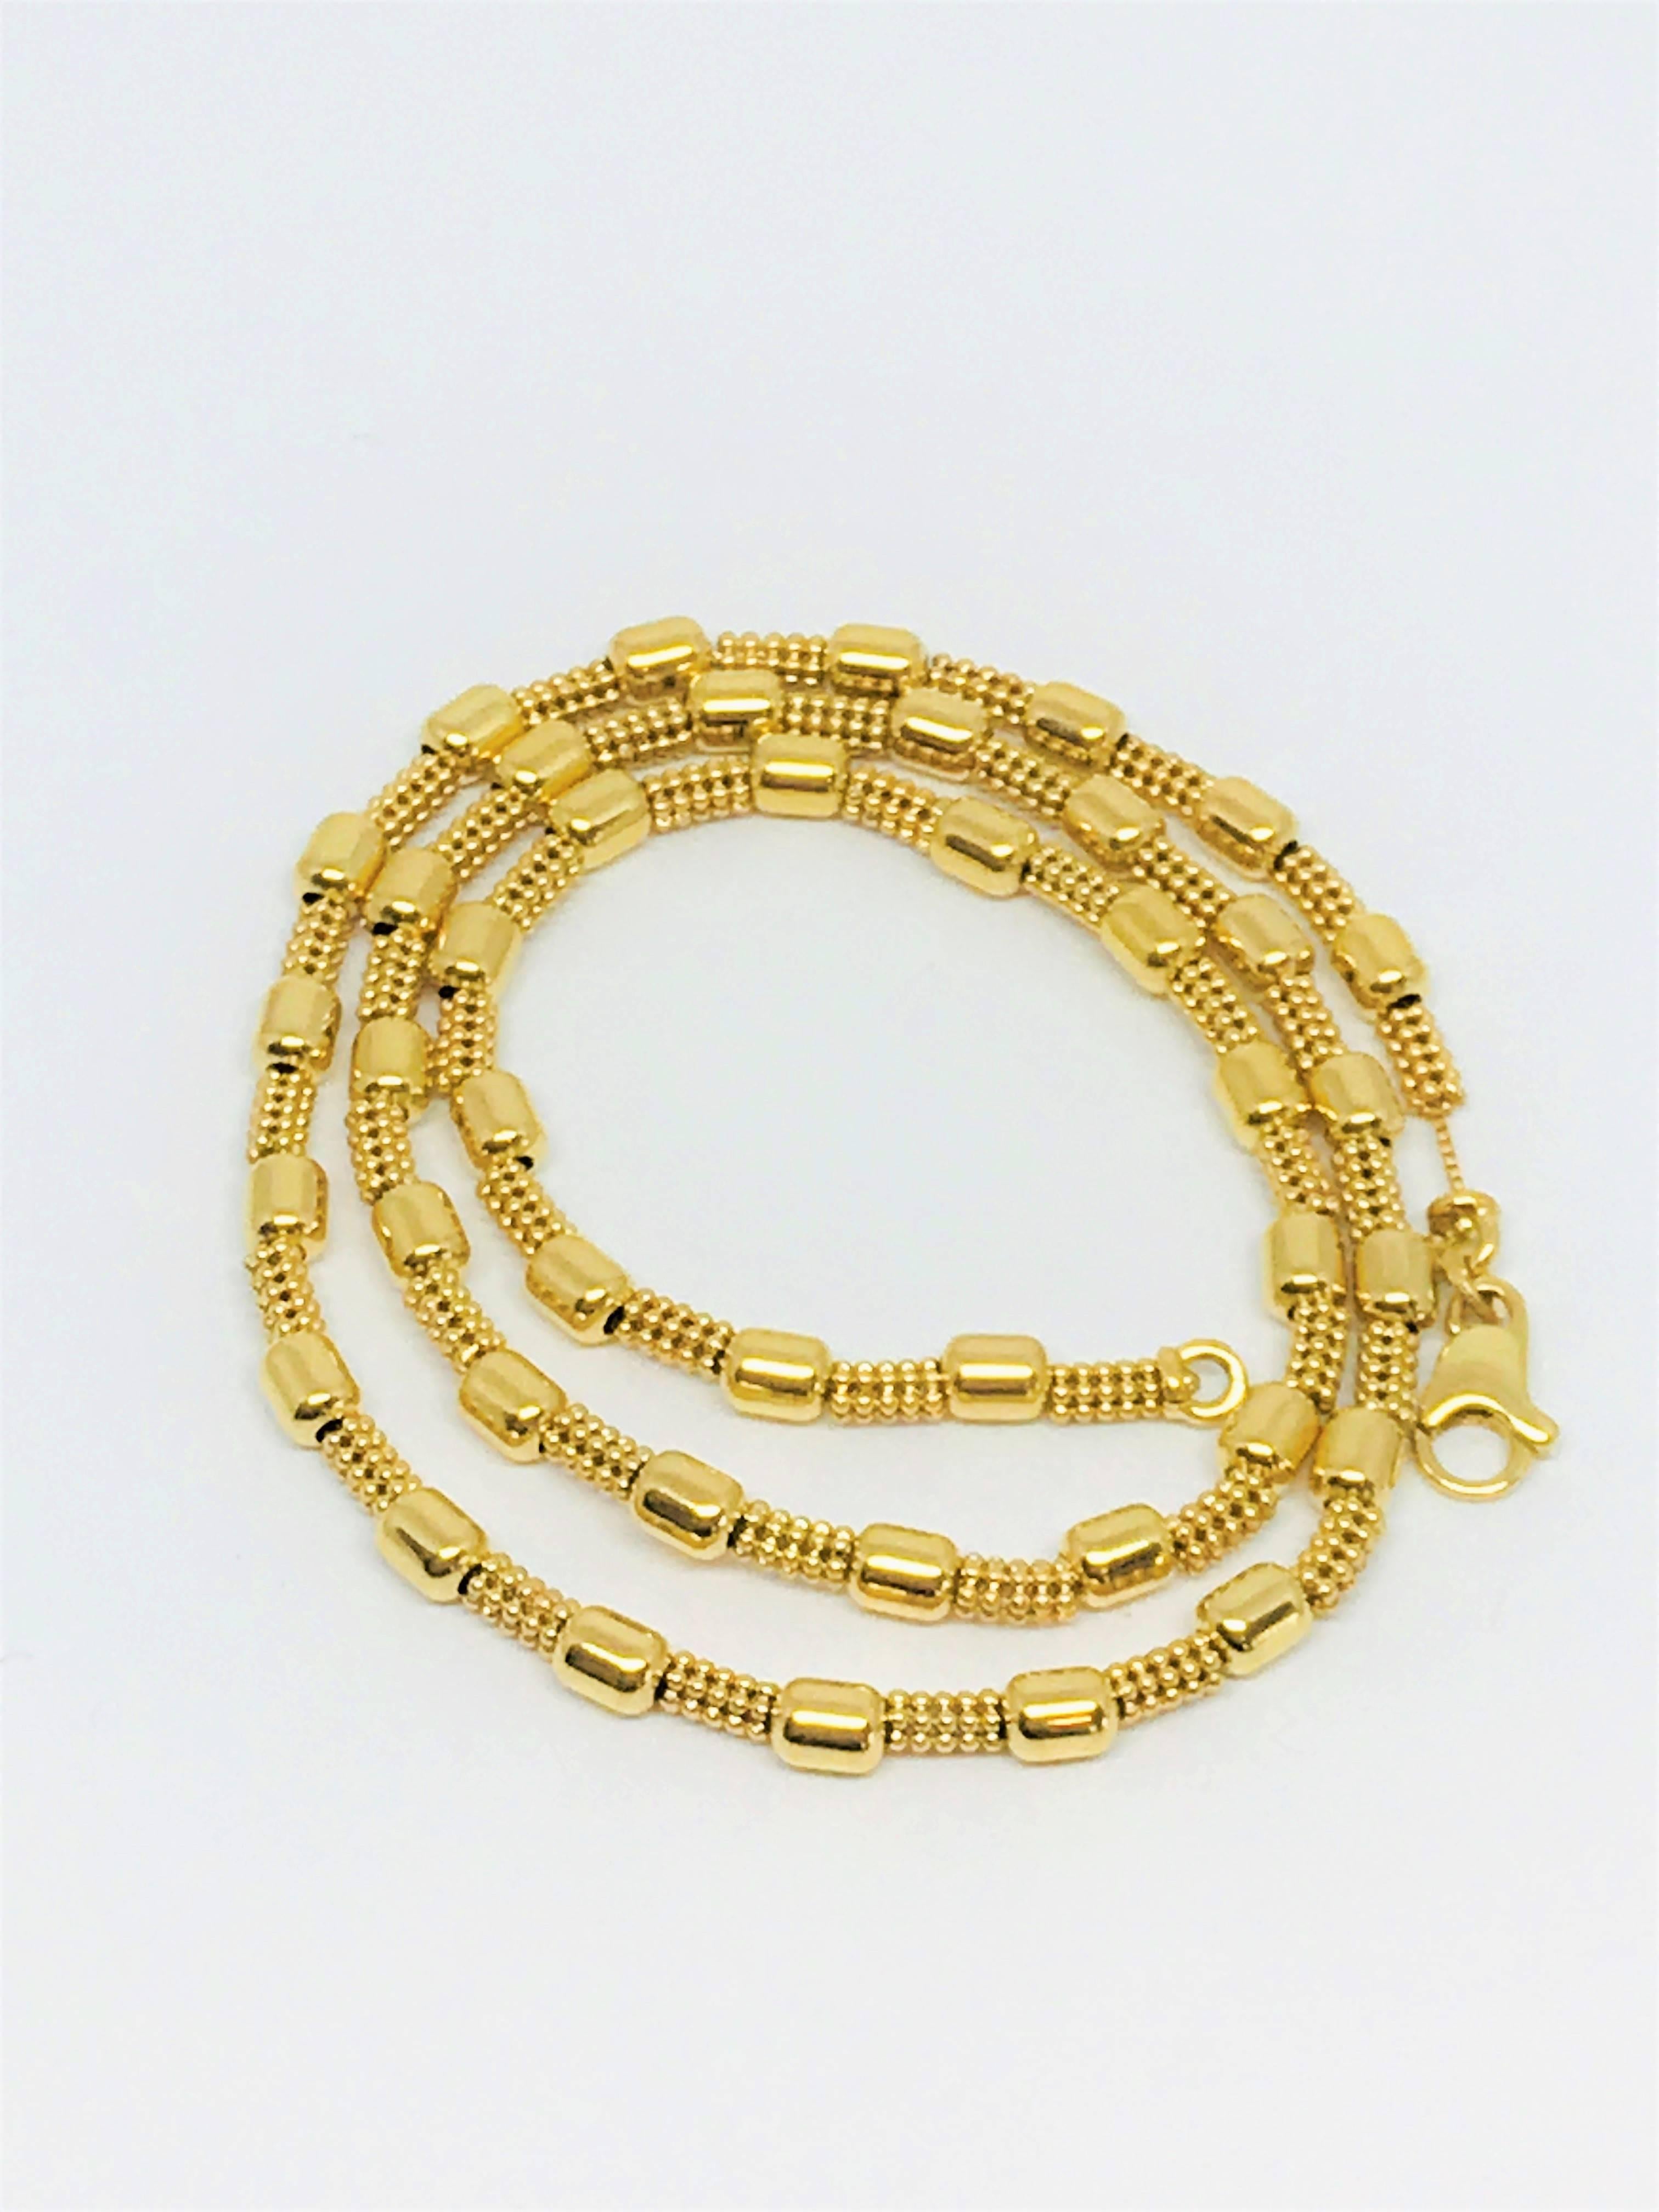 Beautiful classic style, 18k Yellow Gold Fancy Bead Chain necklace. Perfect for everyday!
Length of chain is 18 inches
Weight is 18.89 grams
Hallmarked - 1 AR 750 IND UNOAERRE